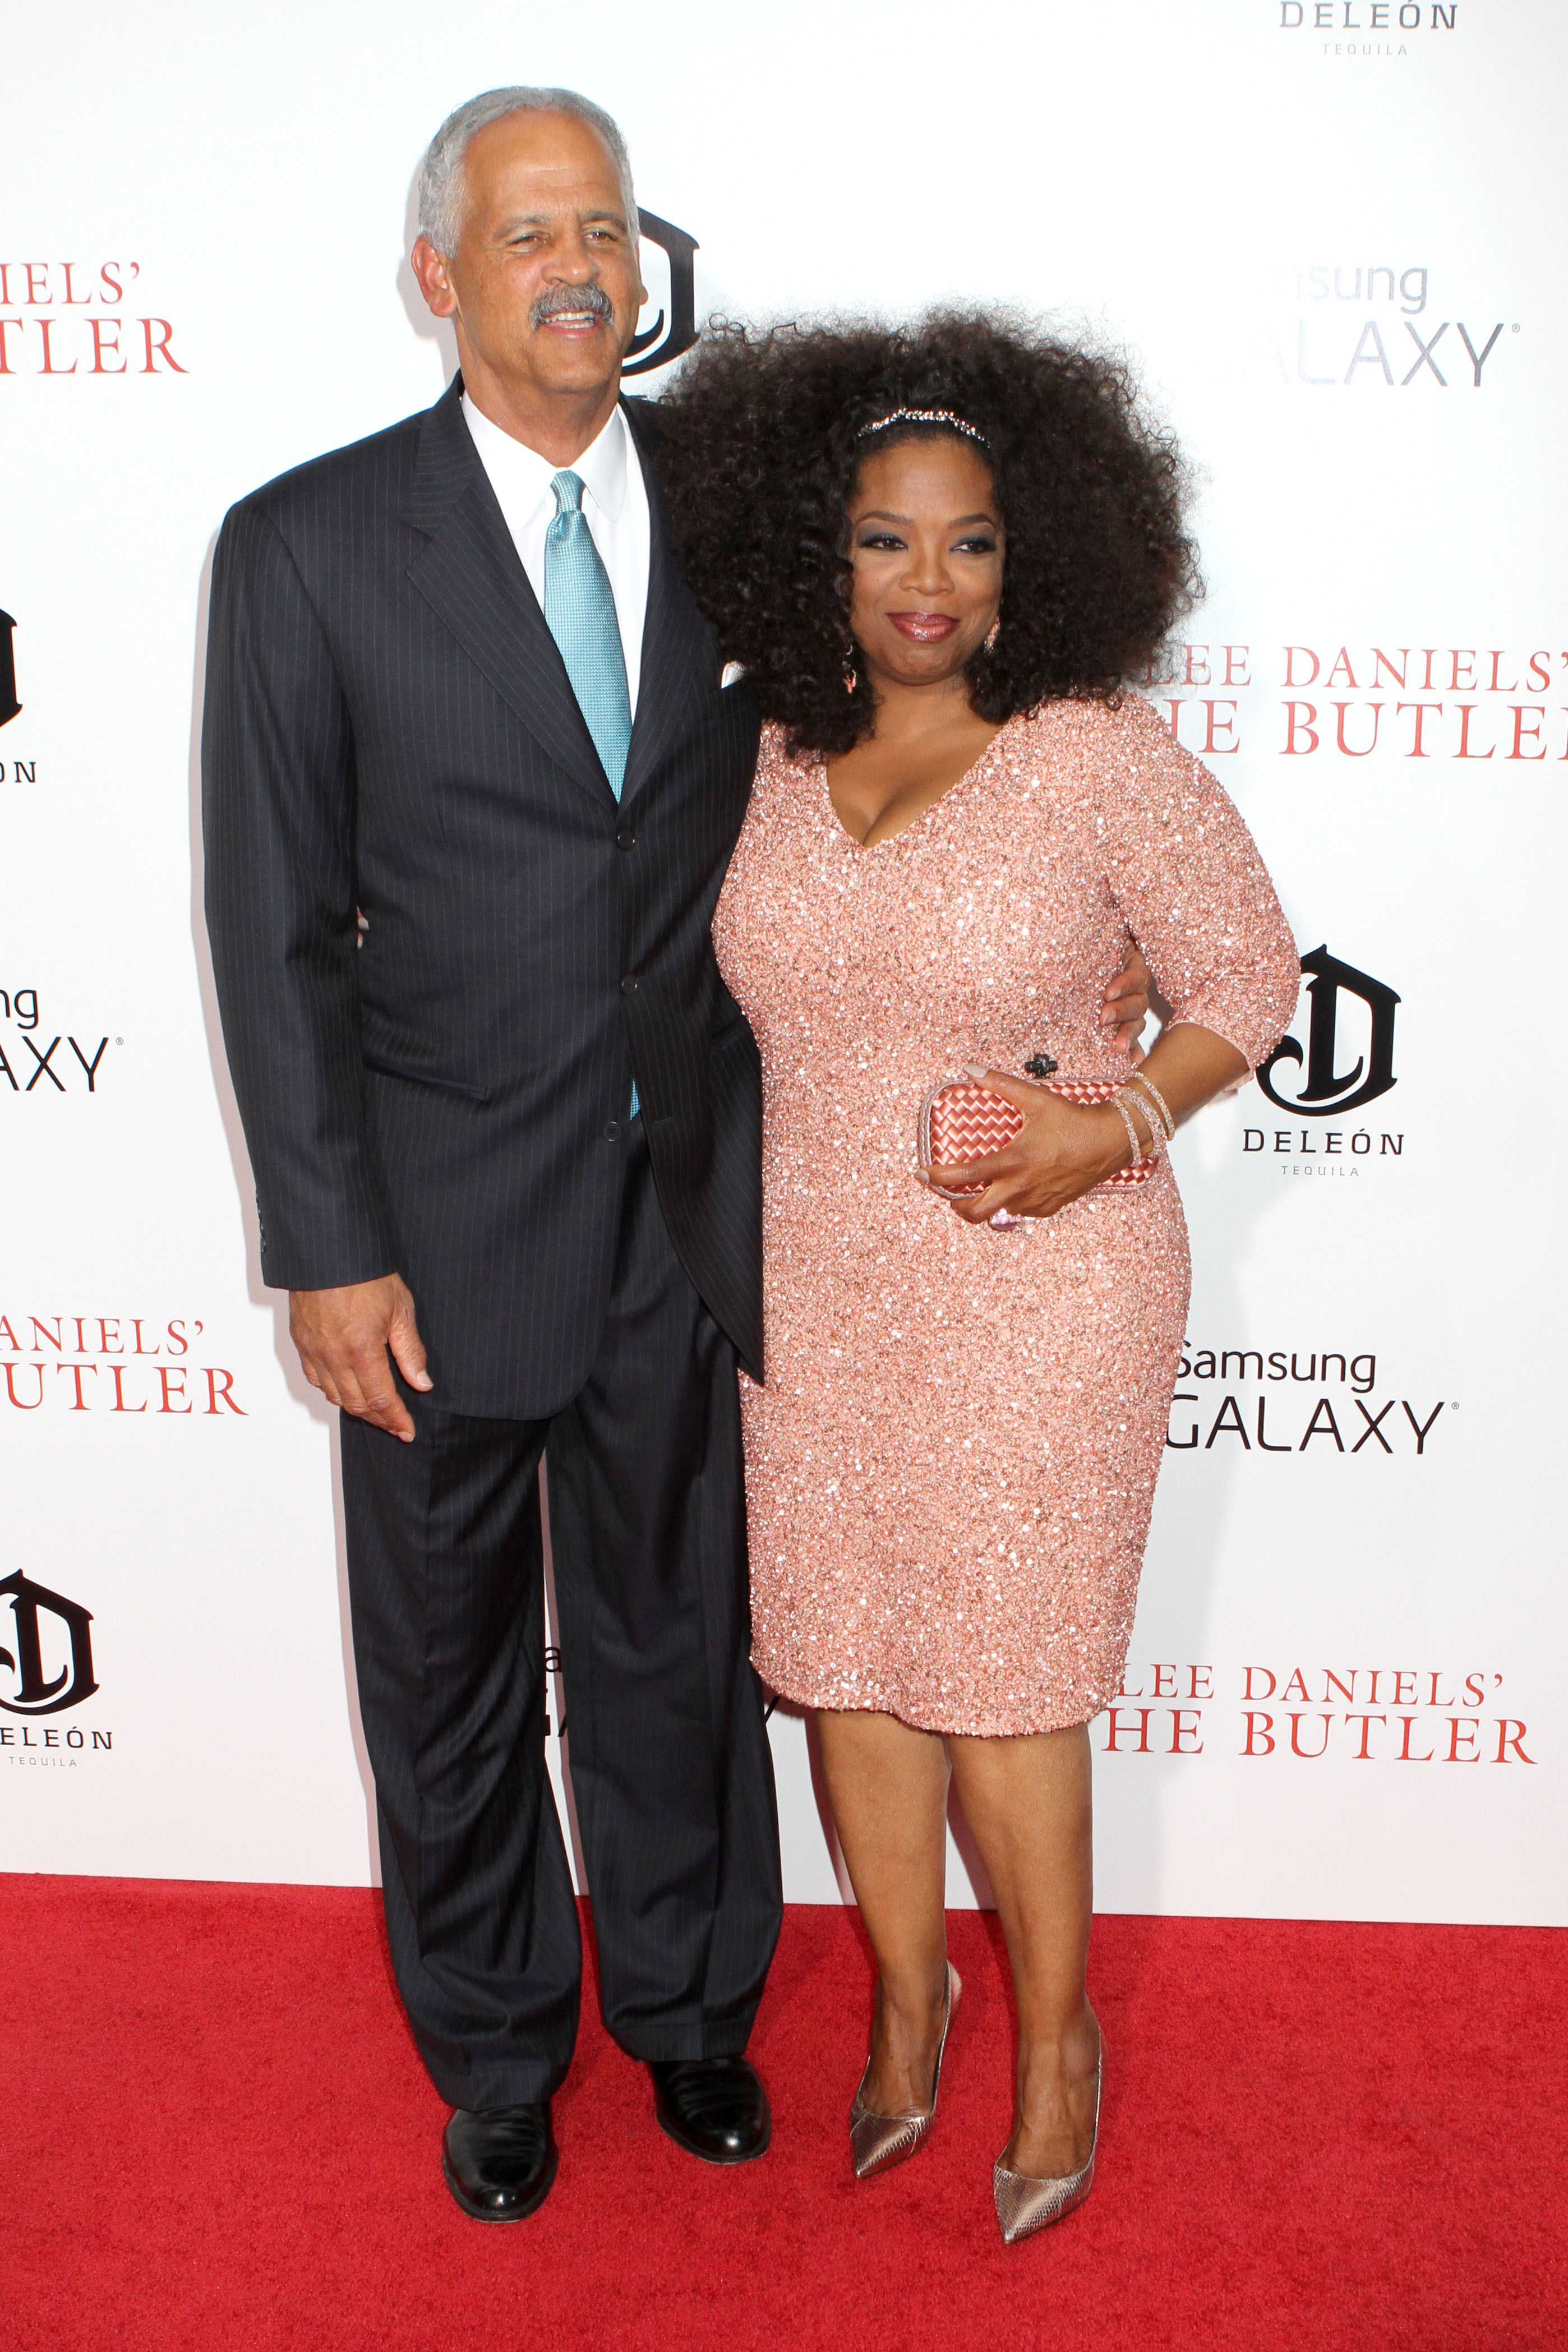 Stedman Graham and Oprah Winfrey attend the premiere of "The Butler" at the Ziegfeld Theatre. | Source: Shutterstock